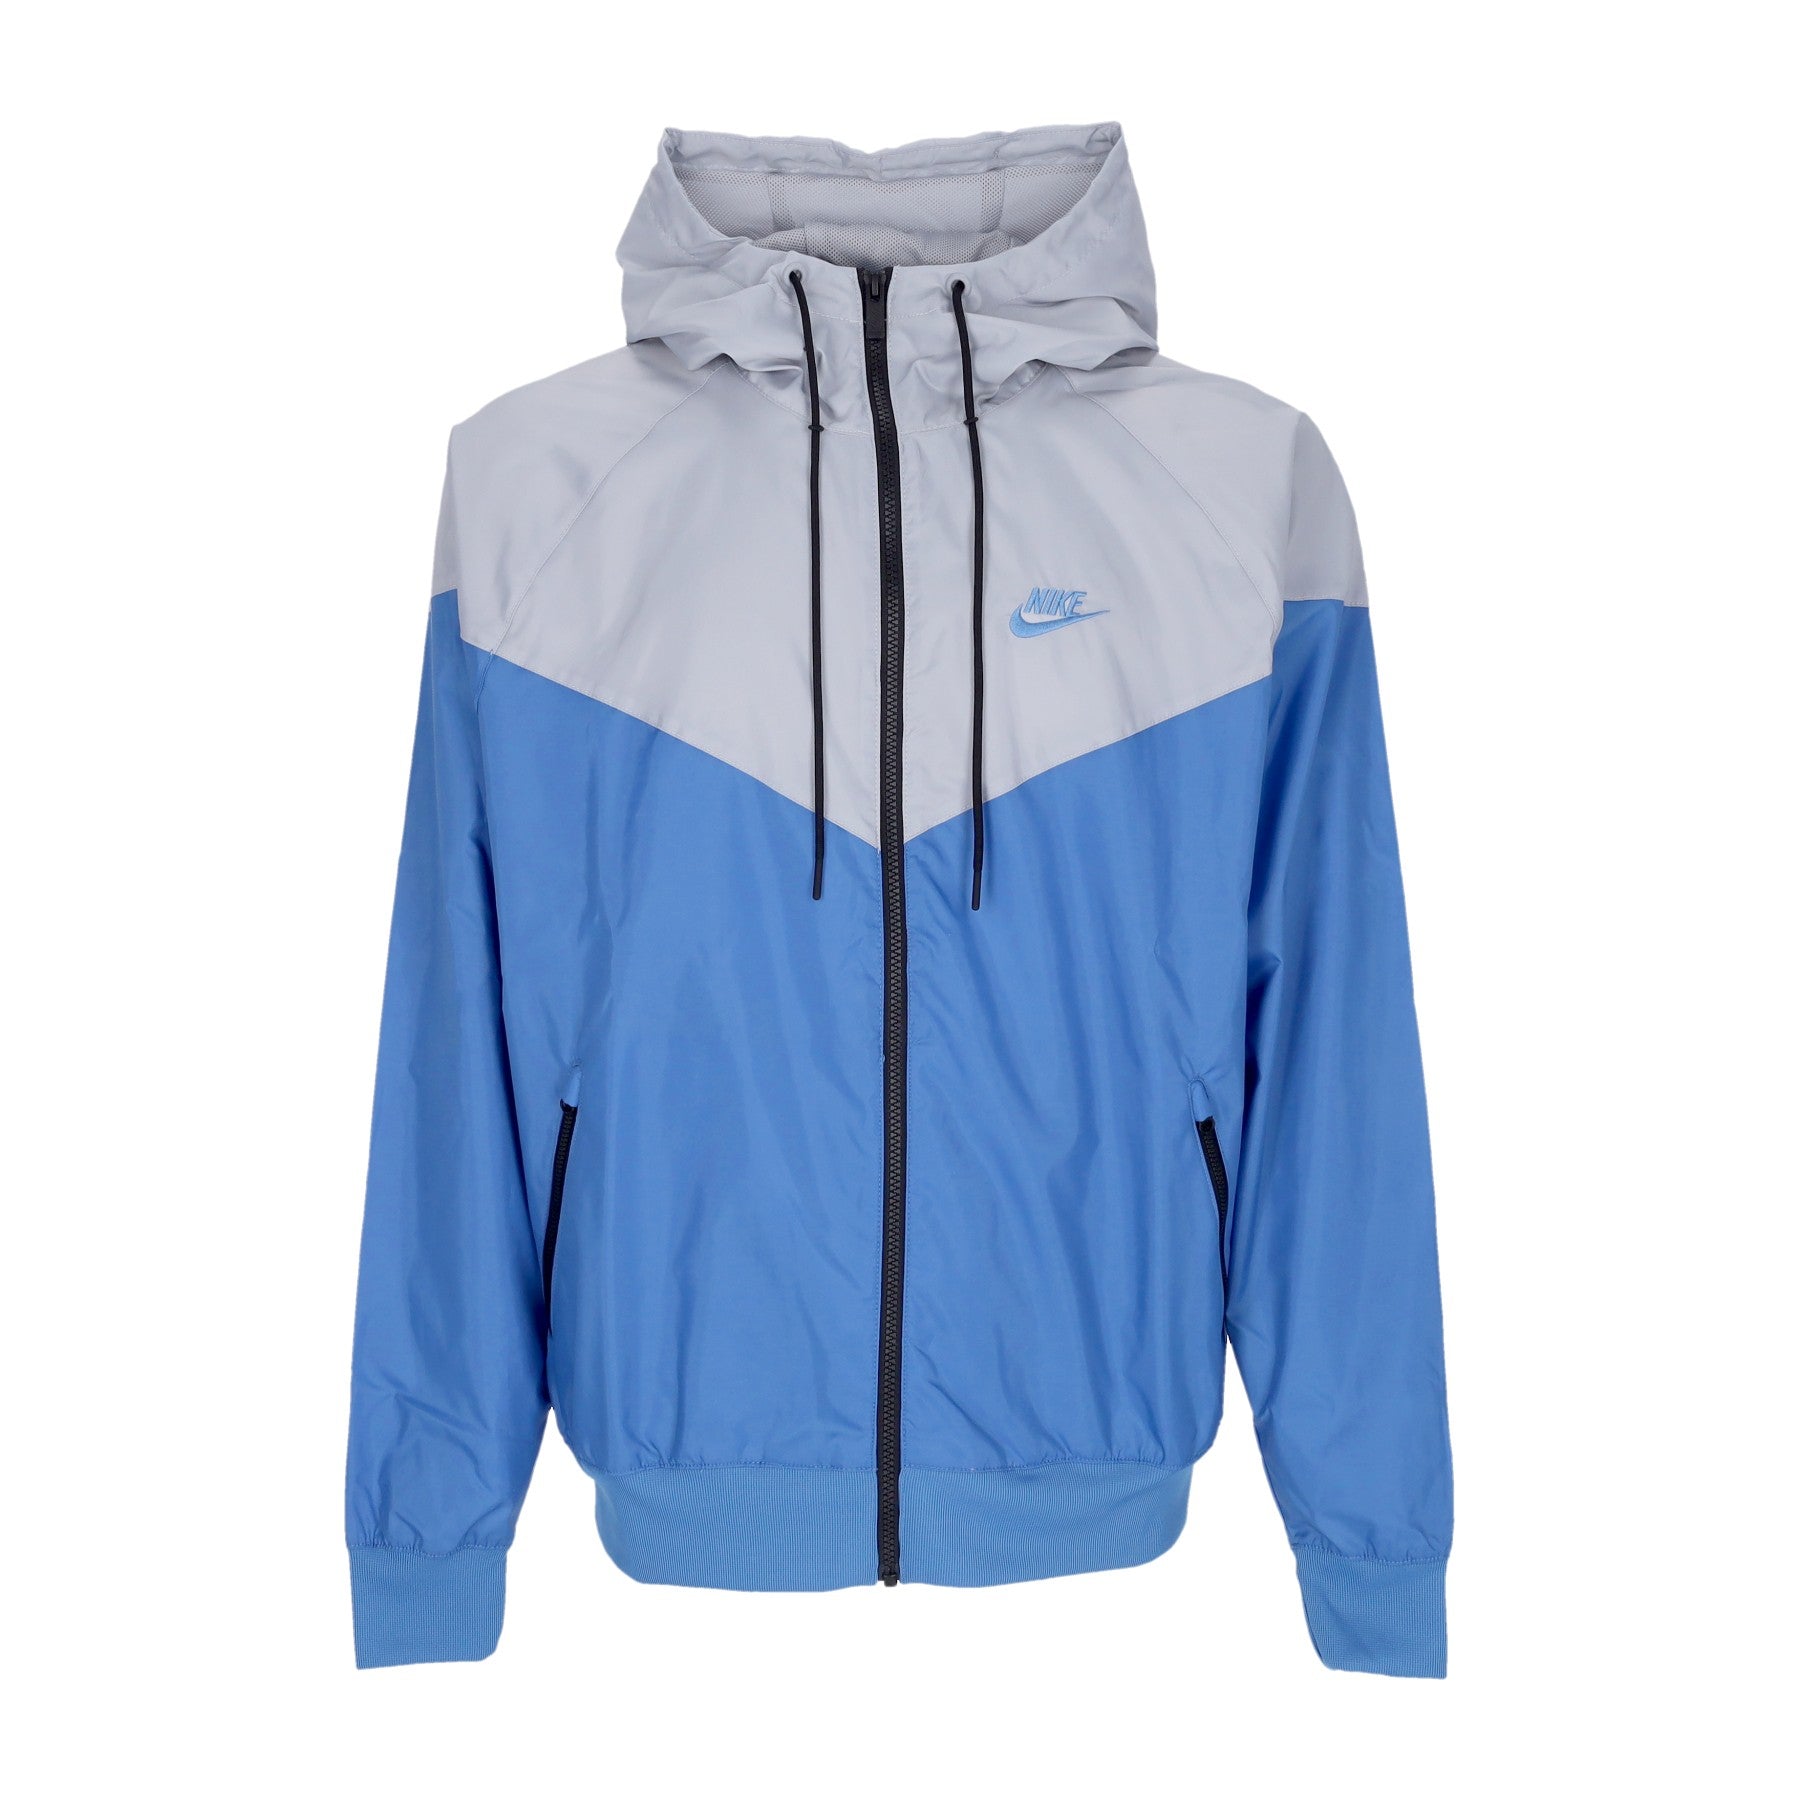 Giacca A Vento Uomo Sportswear Woven Lined Windrunner Hooded Jacket Star Blue/wolf Grey/star Blue DA0001